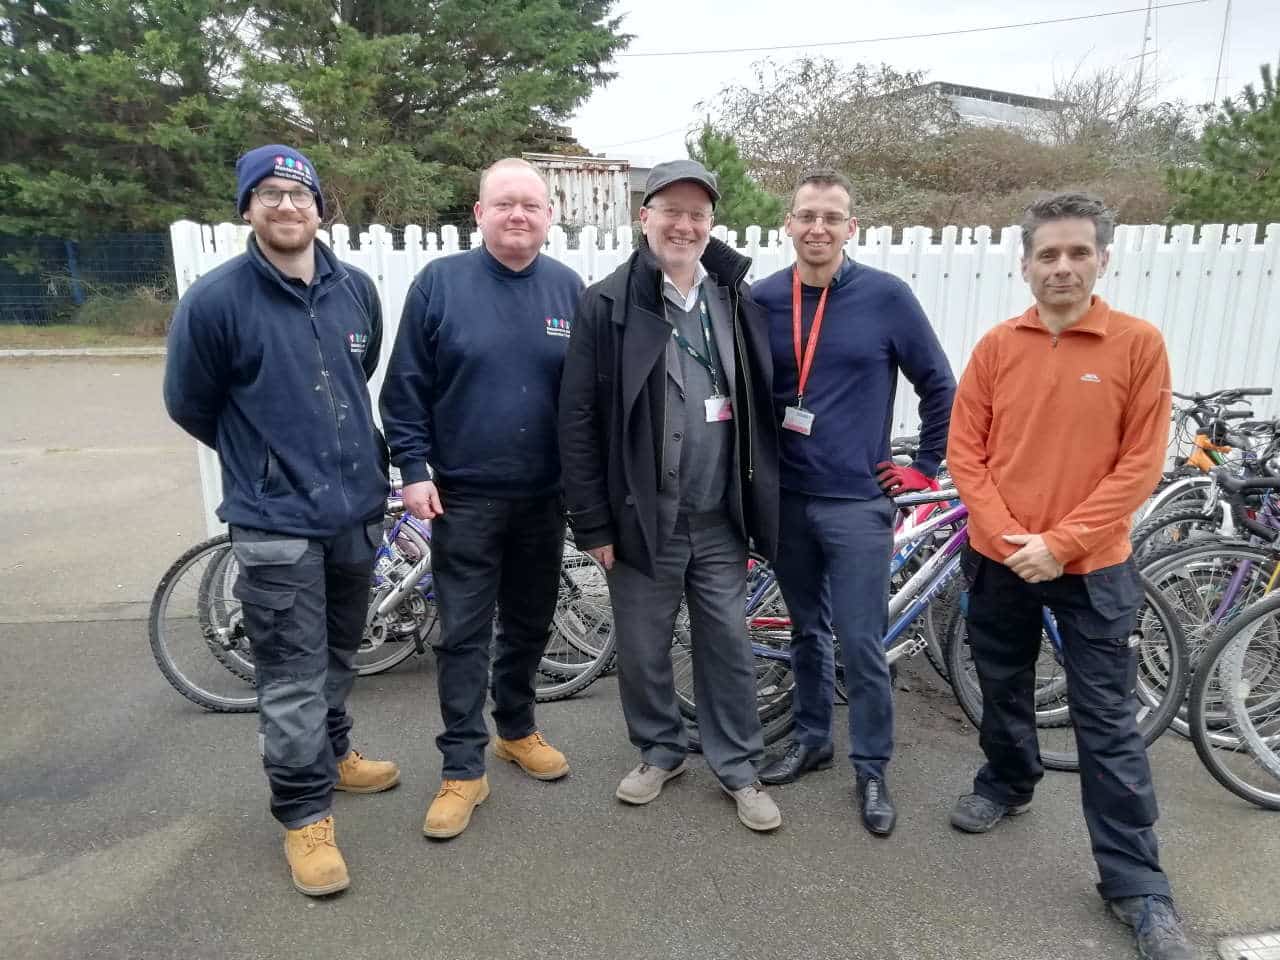 Bike donation to charity from Southern